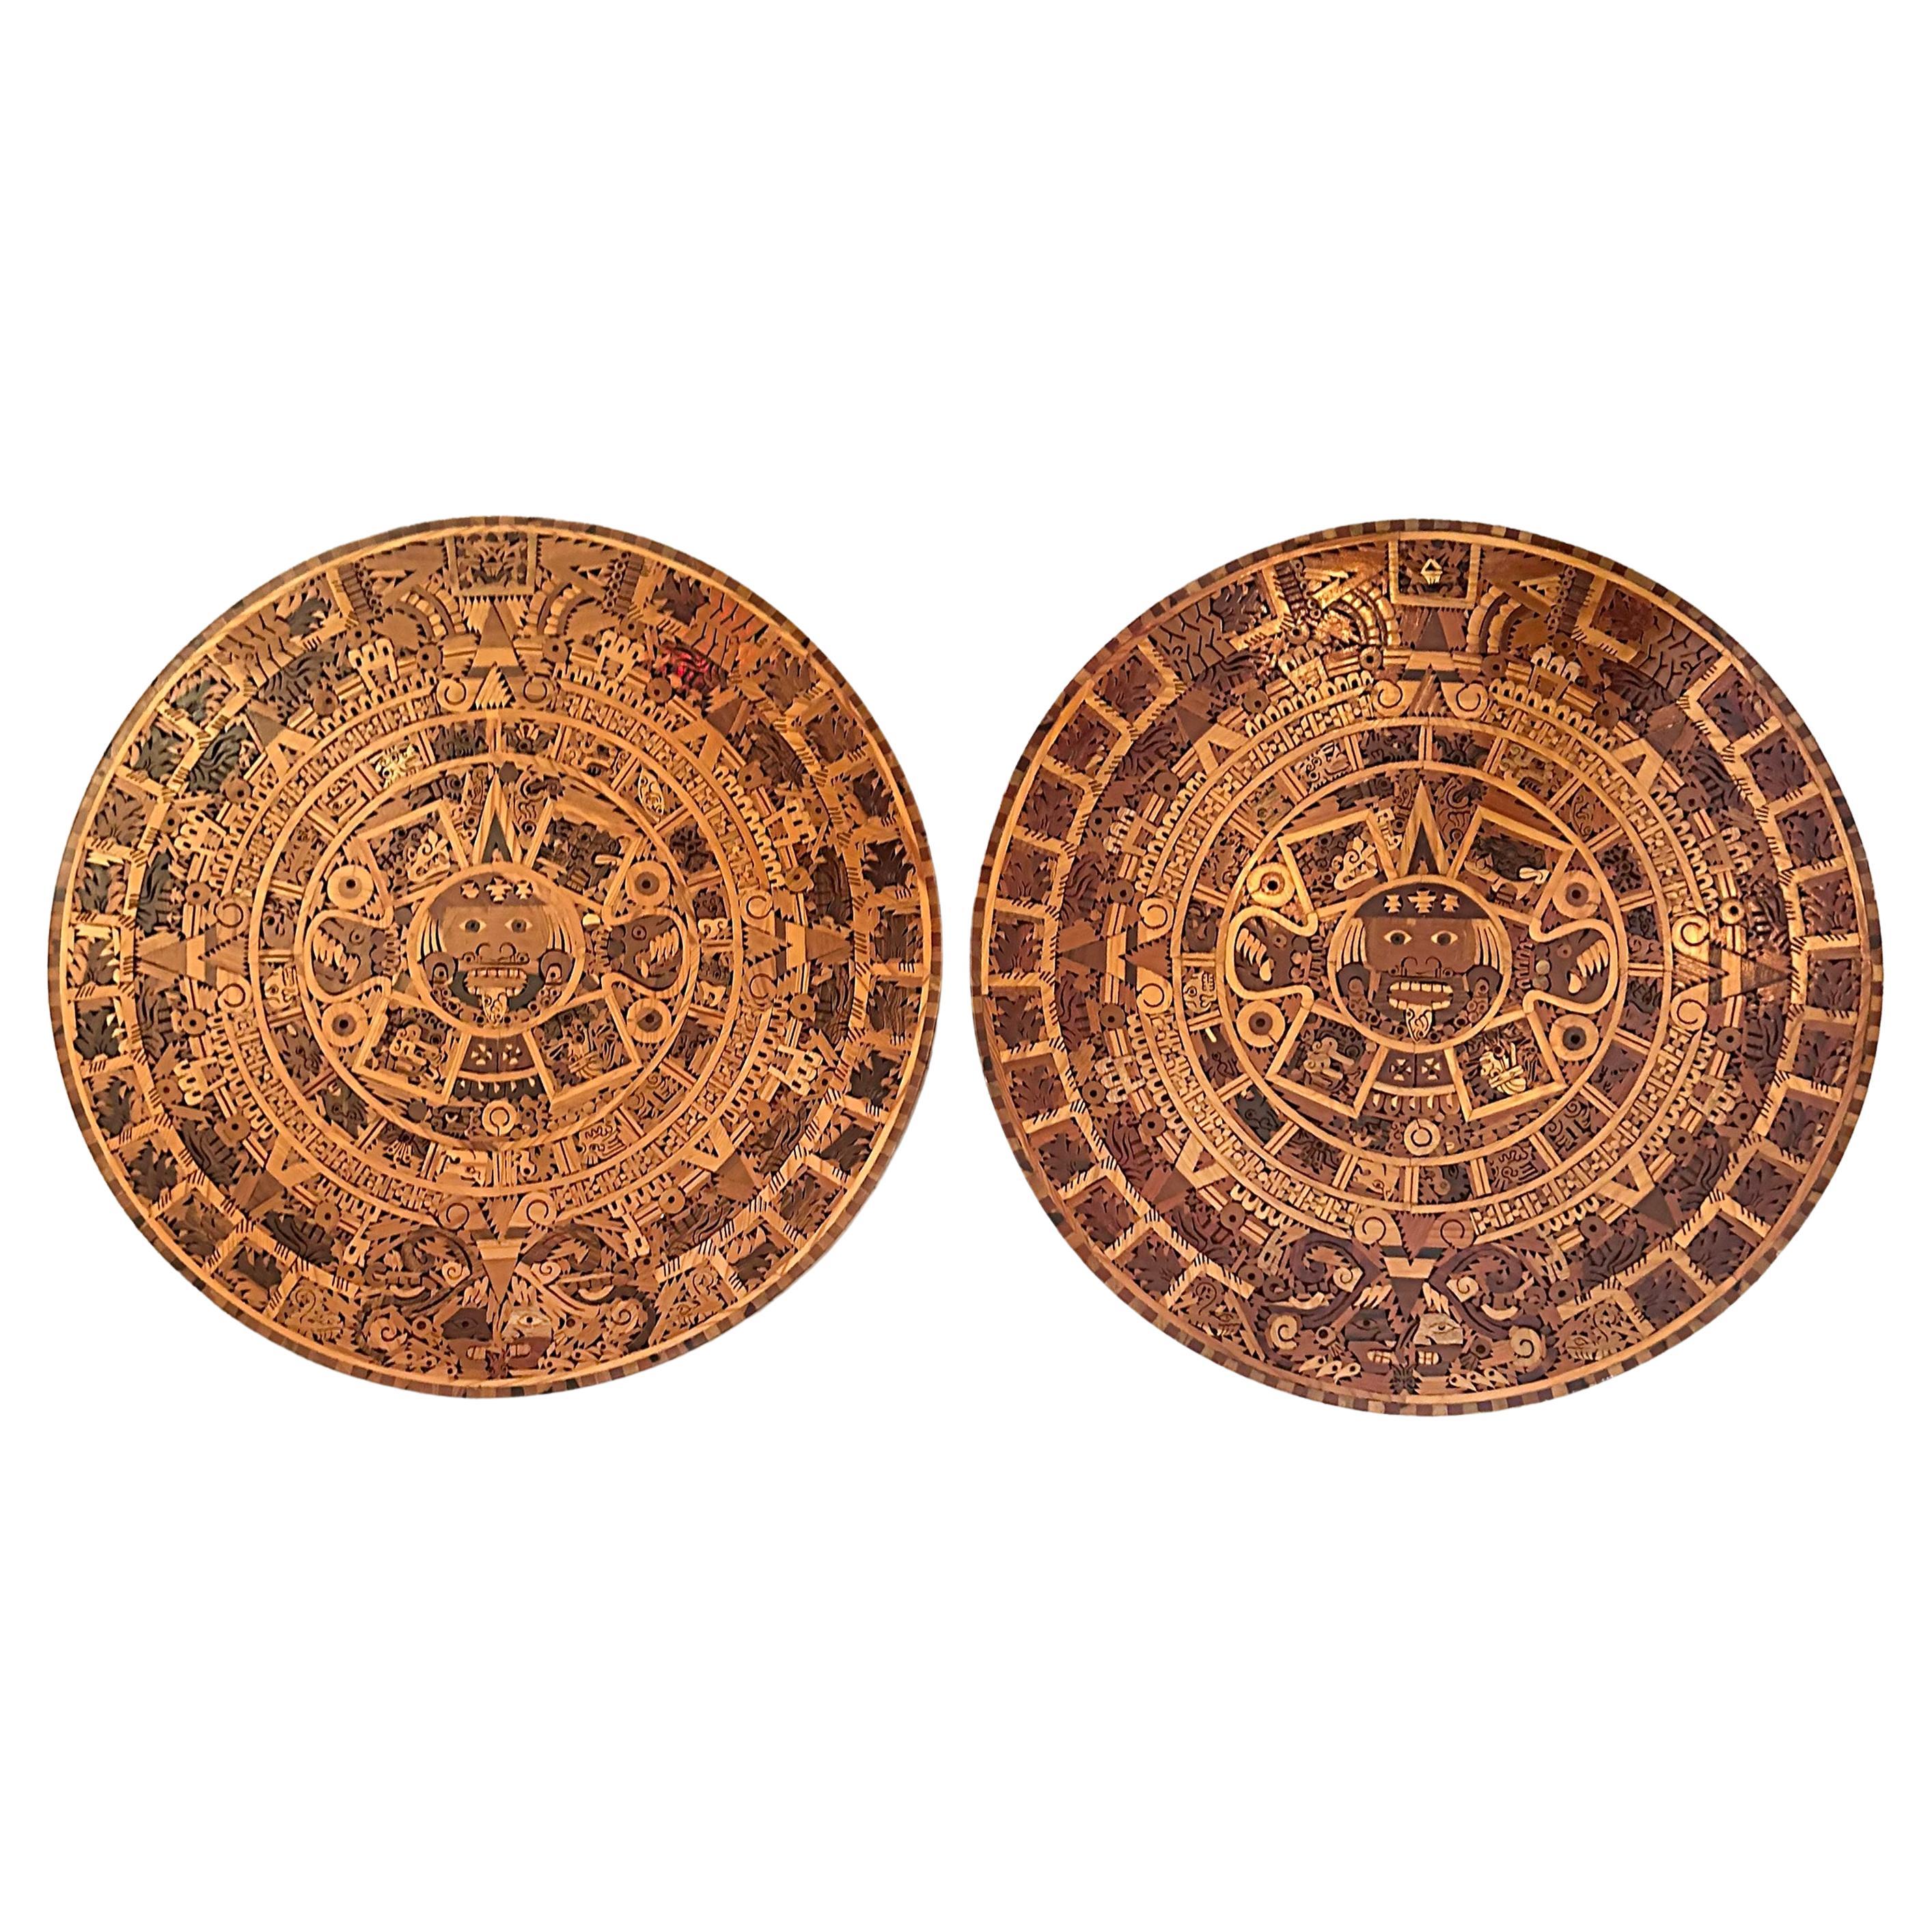 Handmade Mexican Exotic Wood Aztec Calendar Wall Sculpture- Only One Available